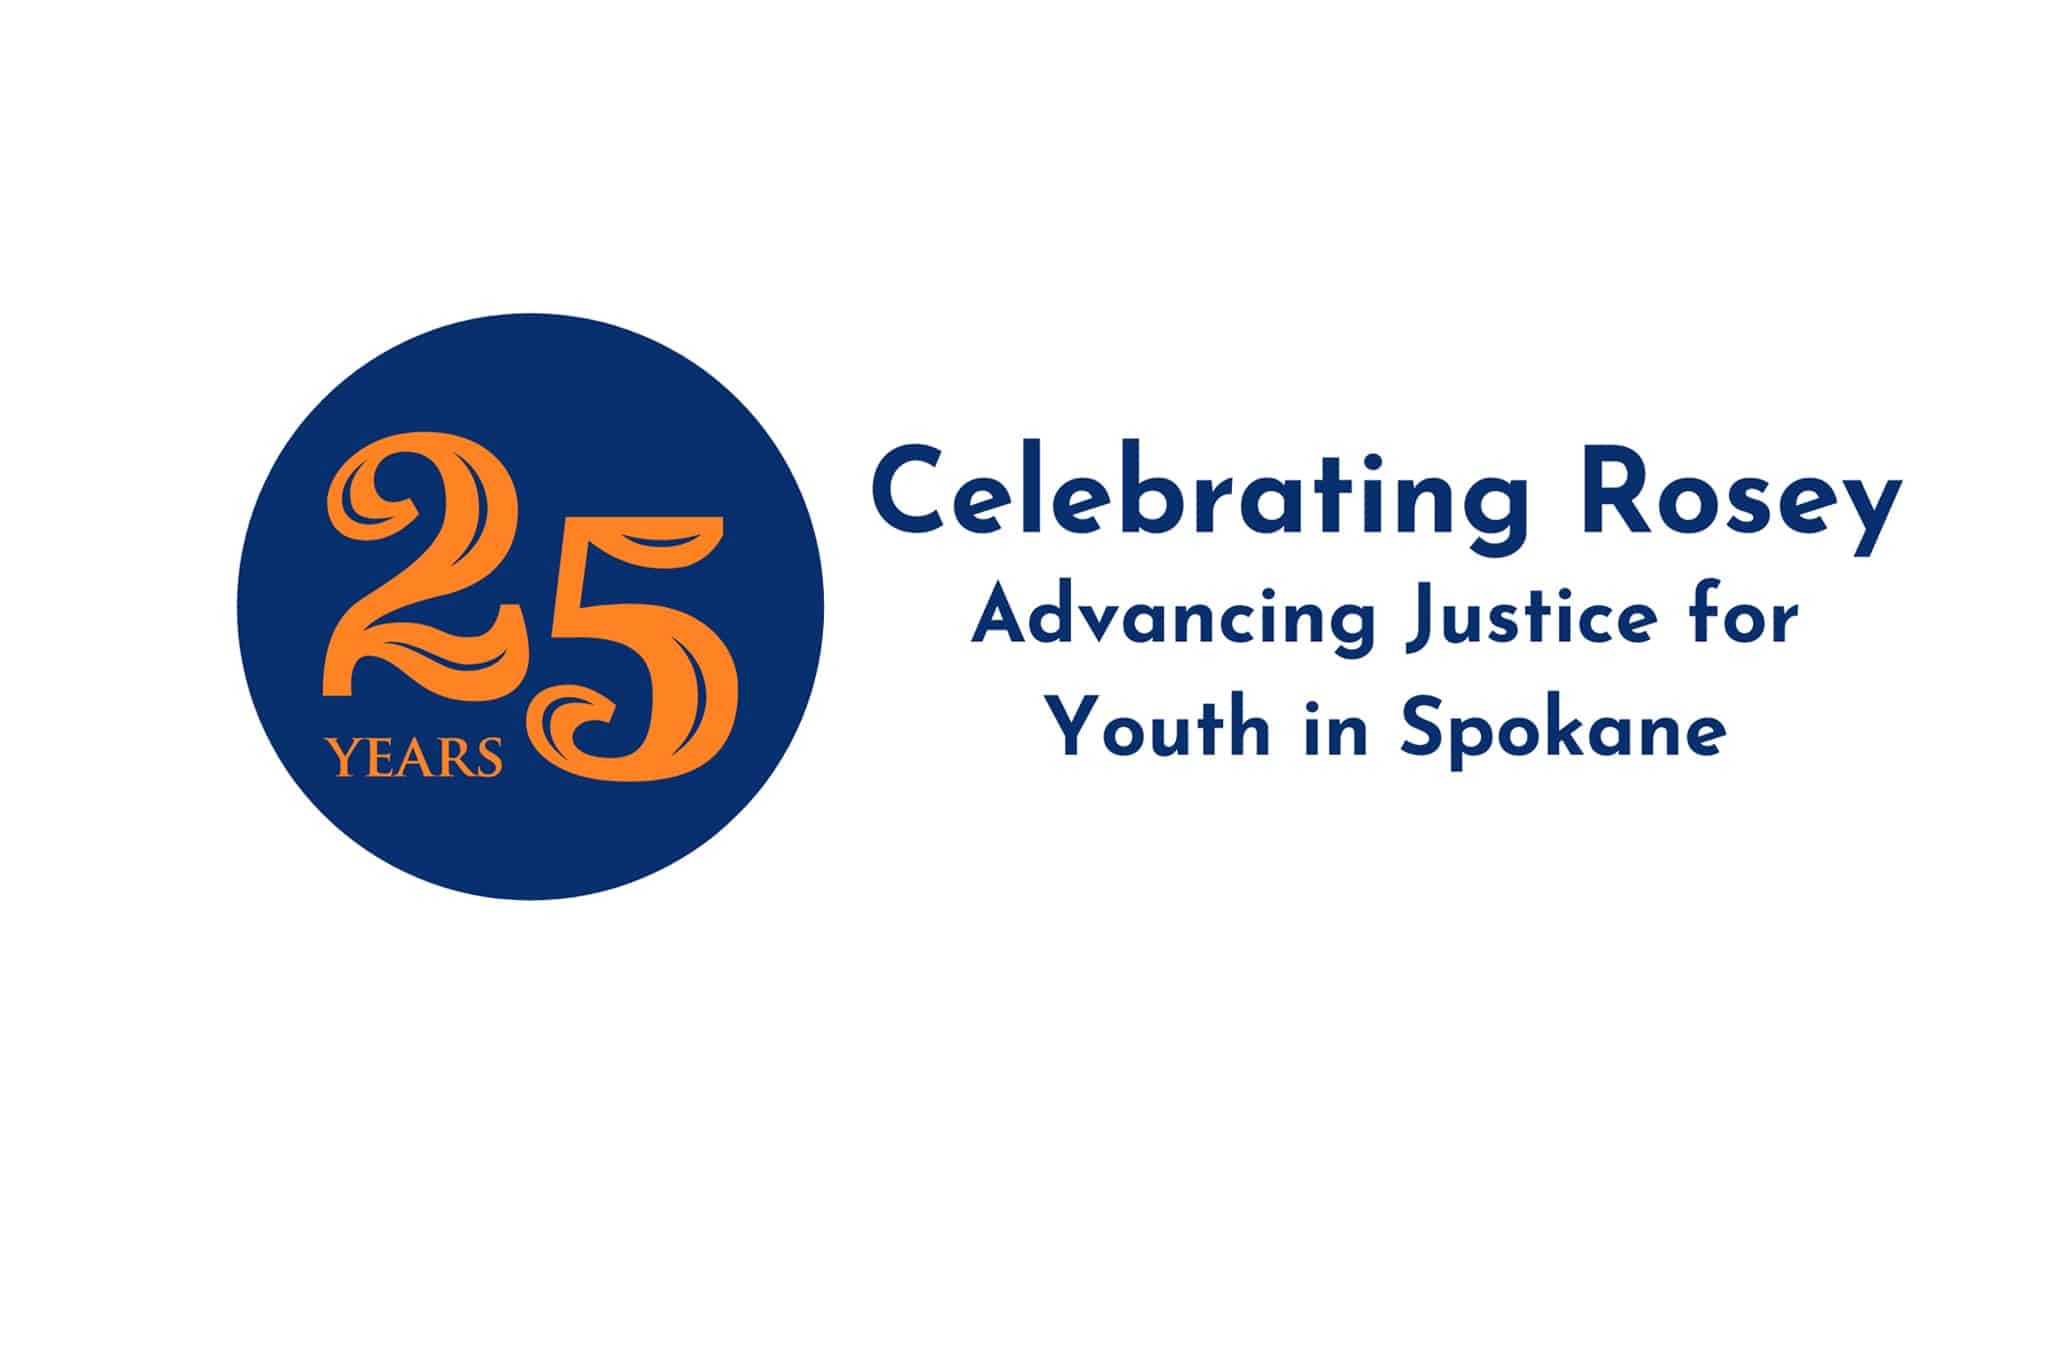 Advancing Justice for Youth in Spokane